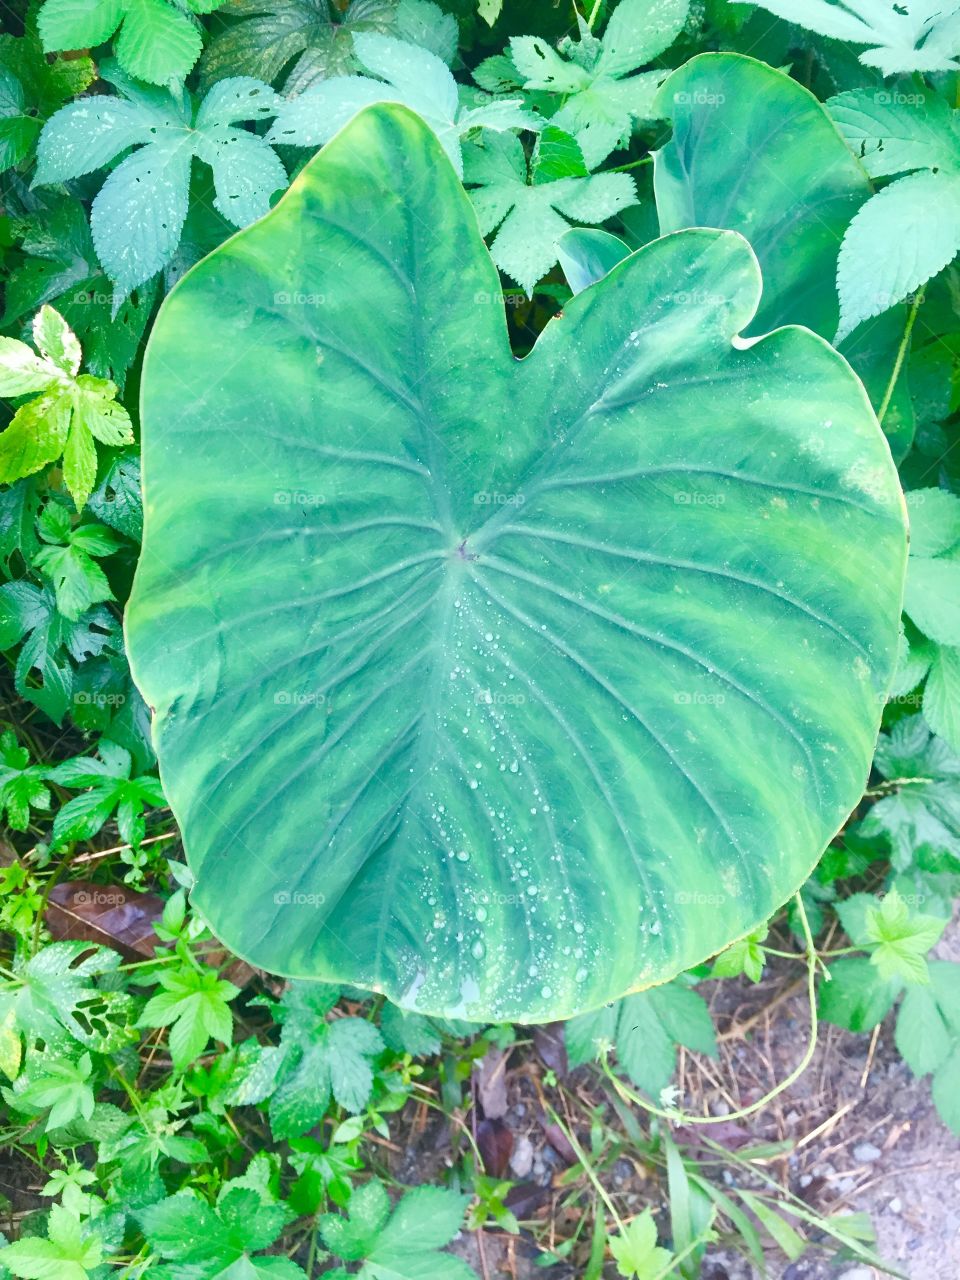 Leaf is a flower of some plants ! Attraction belongs to their leaves 